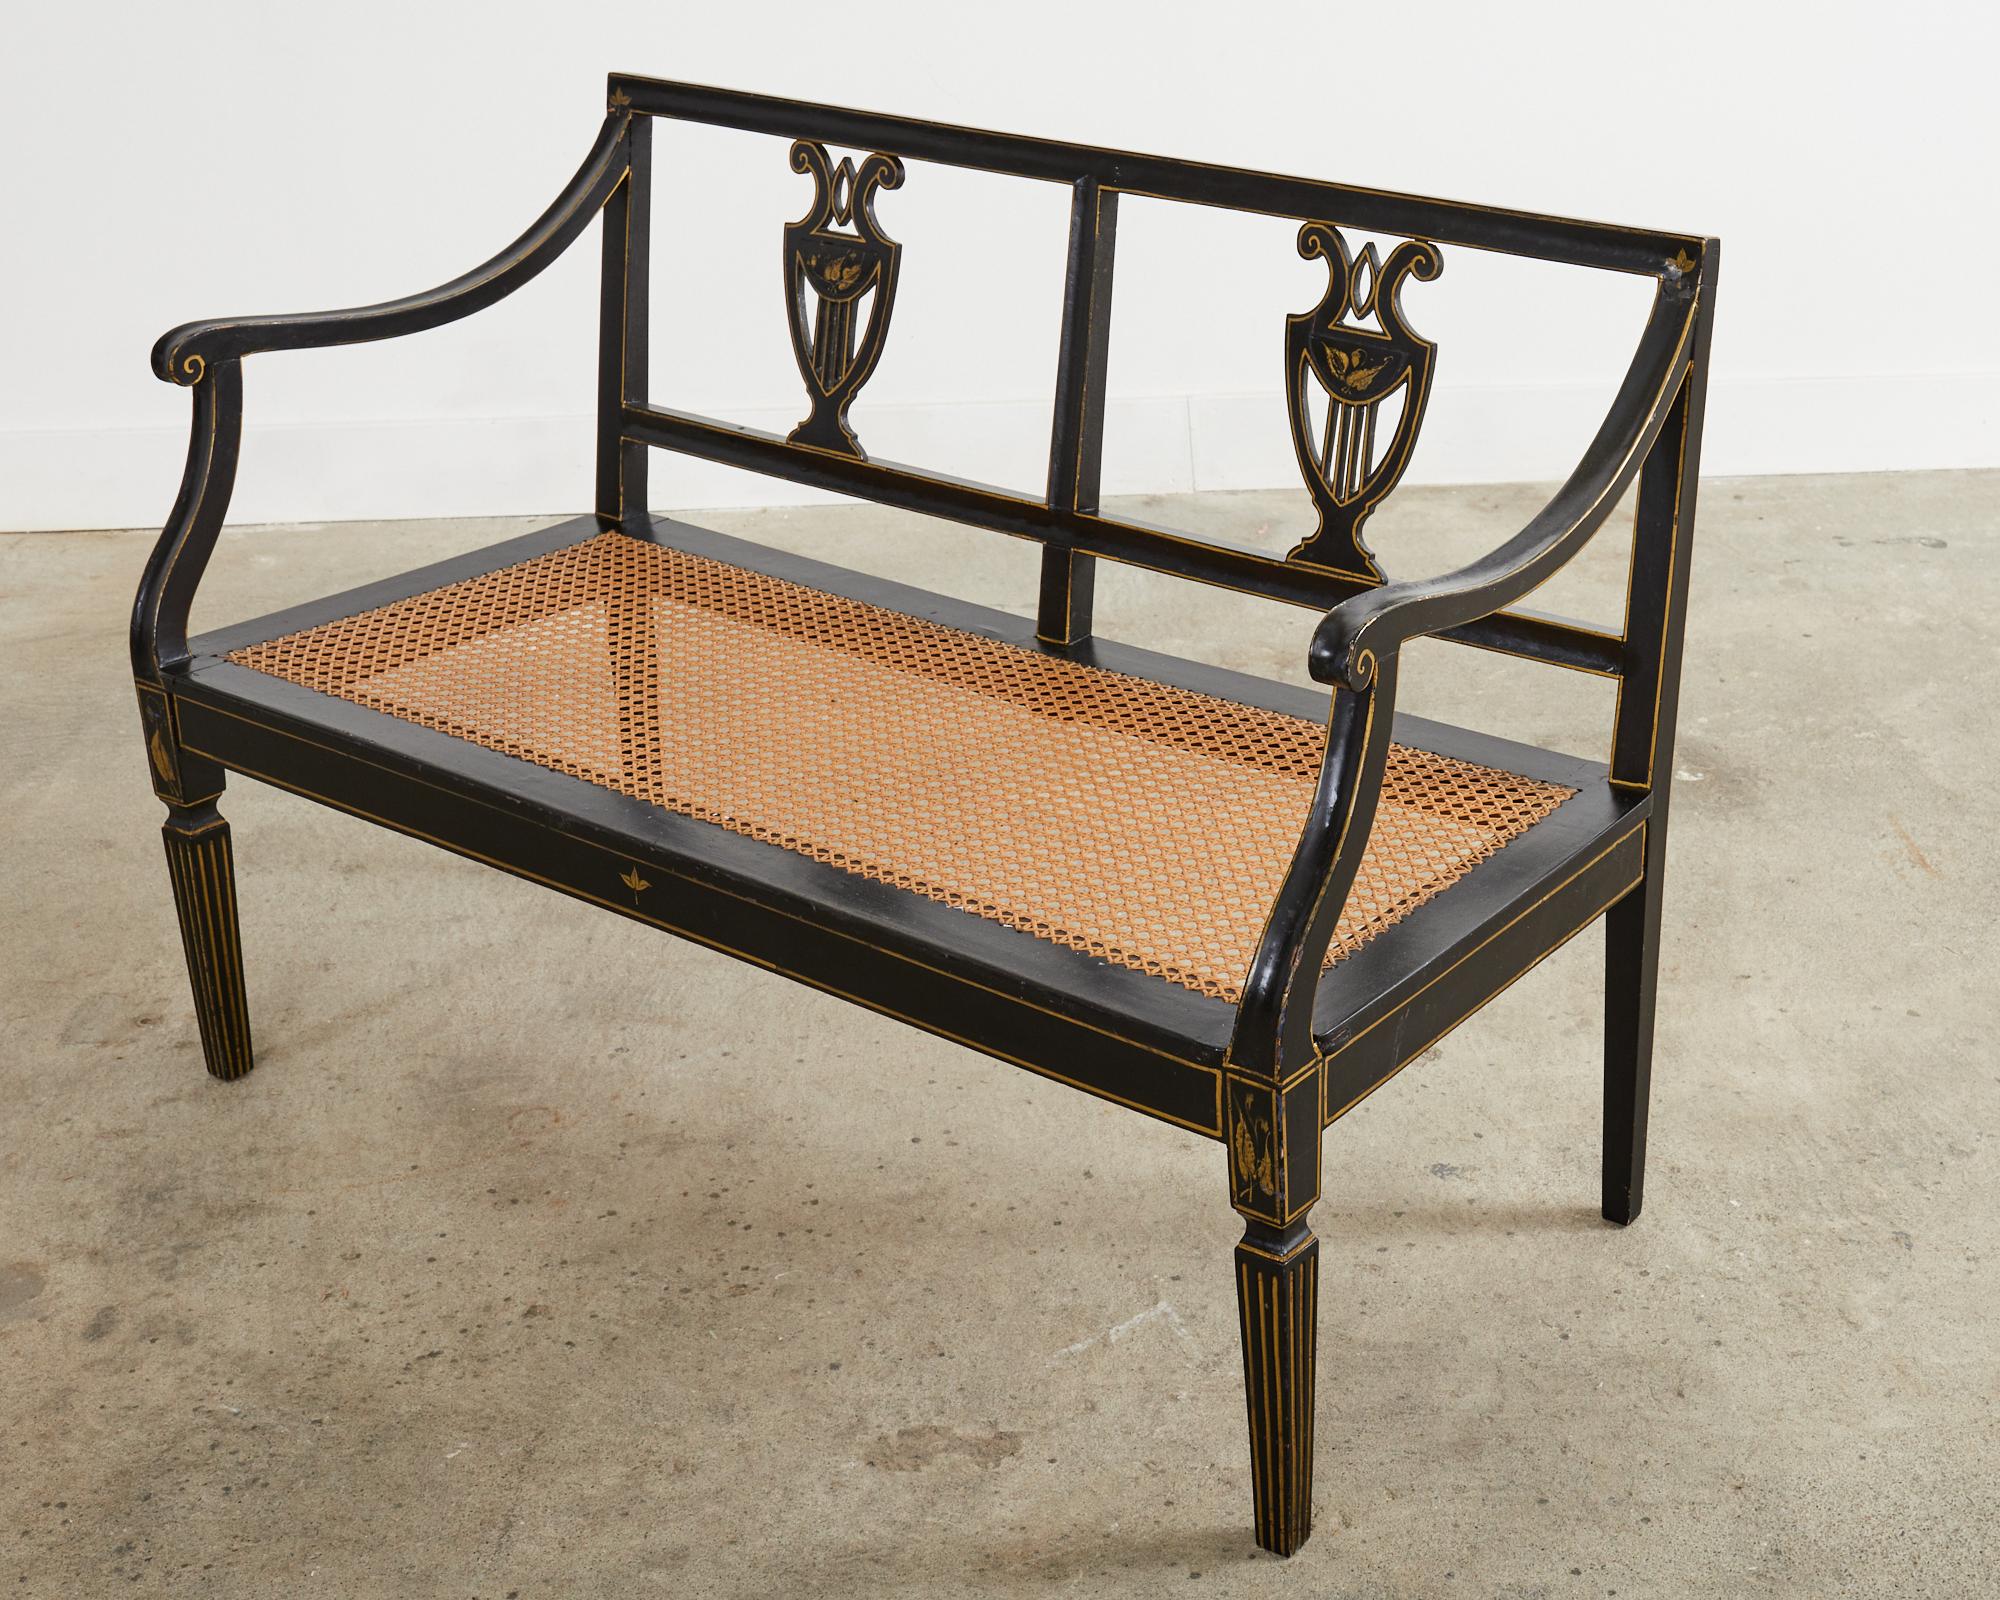 Lacquered 19th Century Italian Neoclassical Venetian Cane Bench or Settee